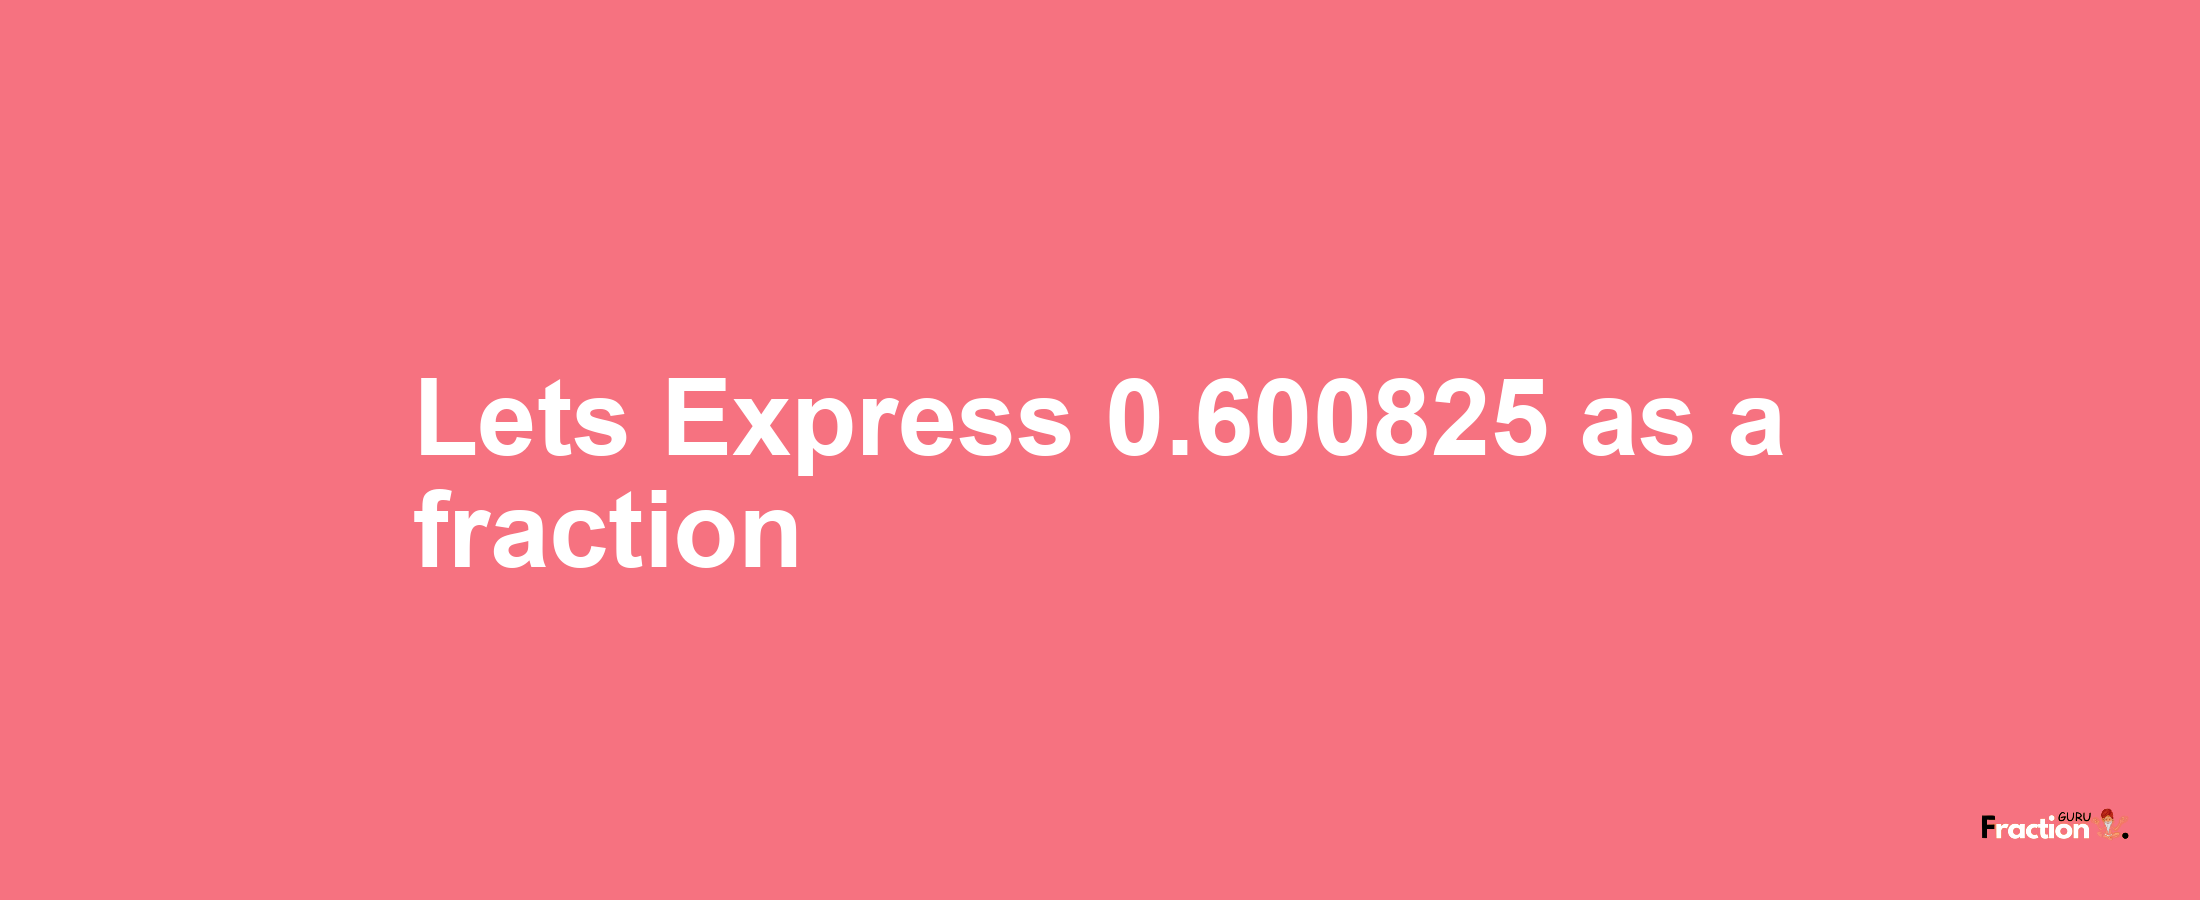 Lets Express 0.600825 as afraction